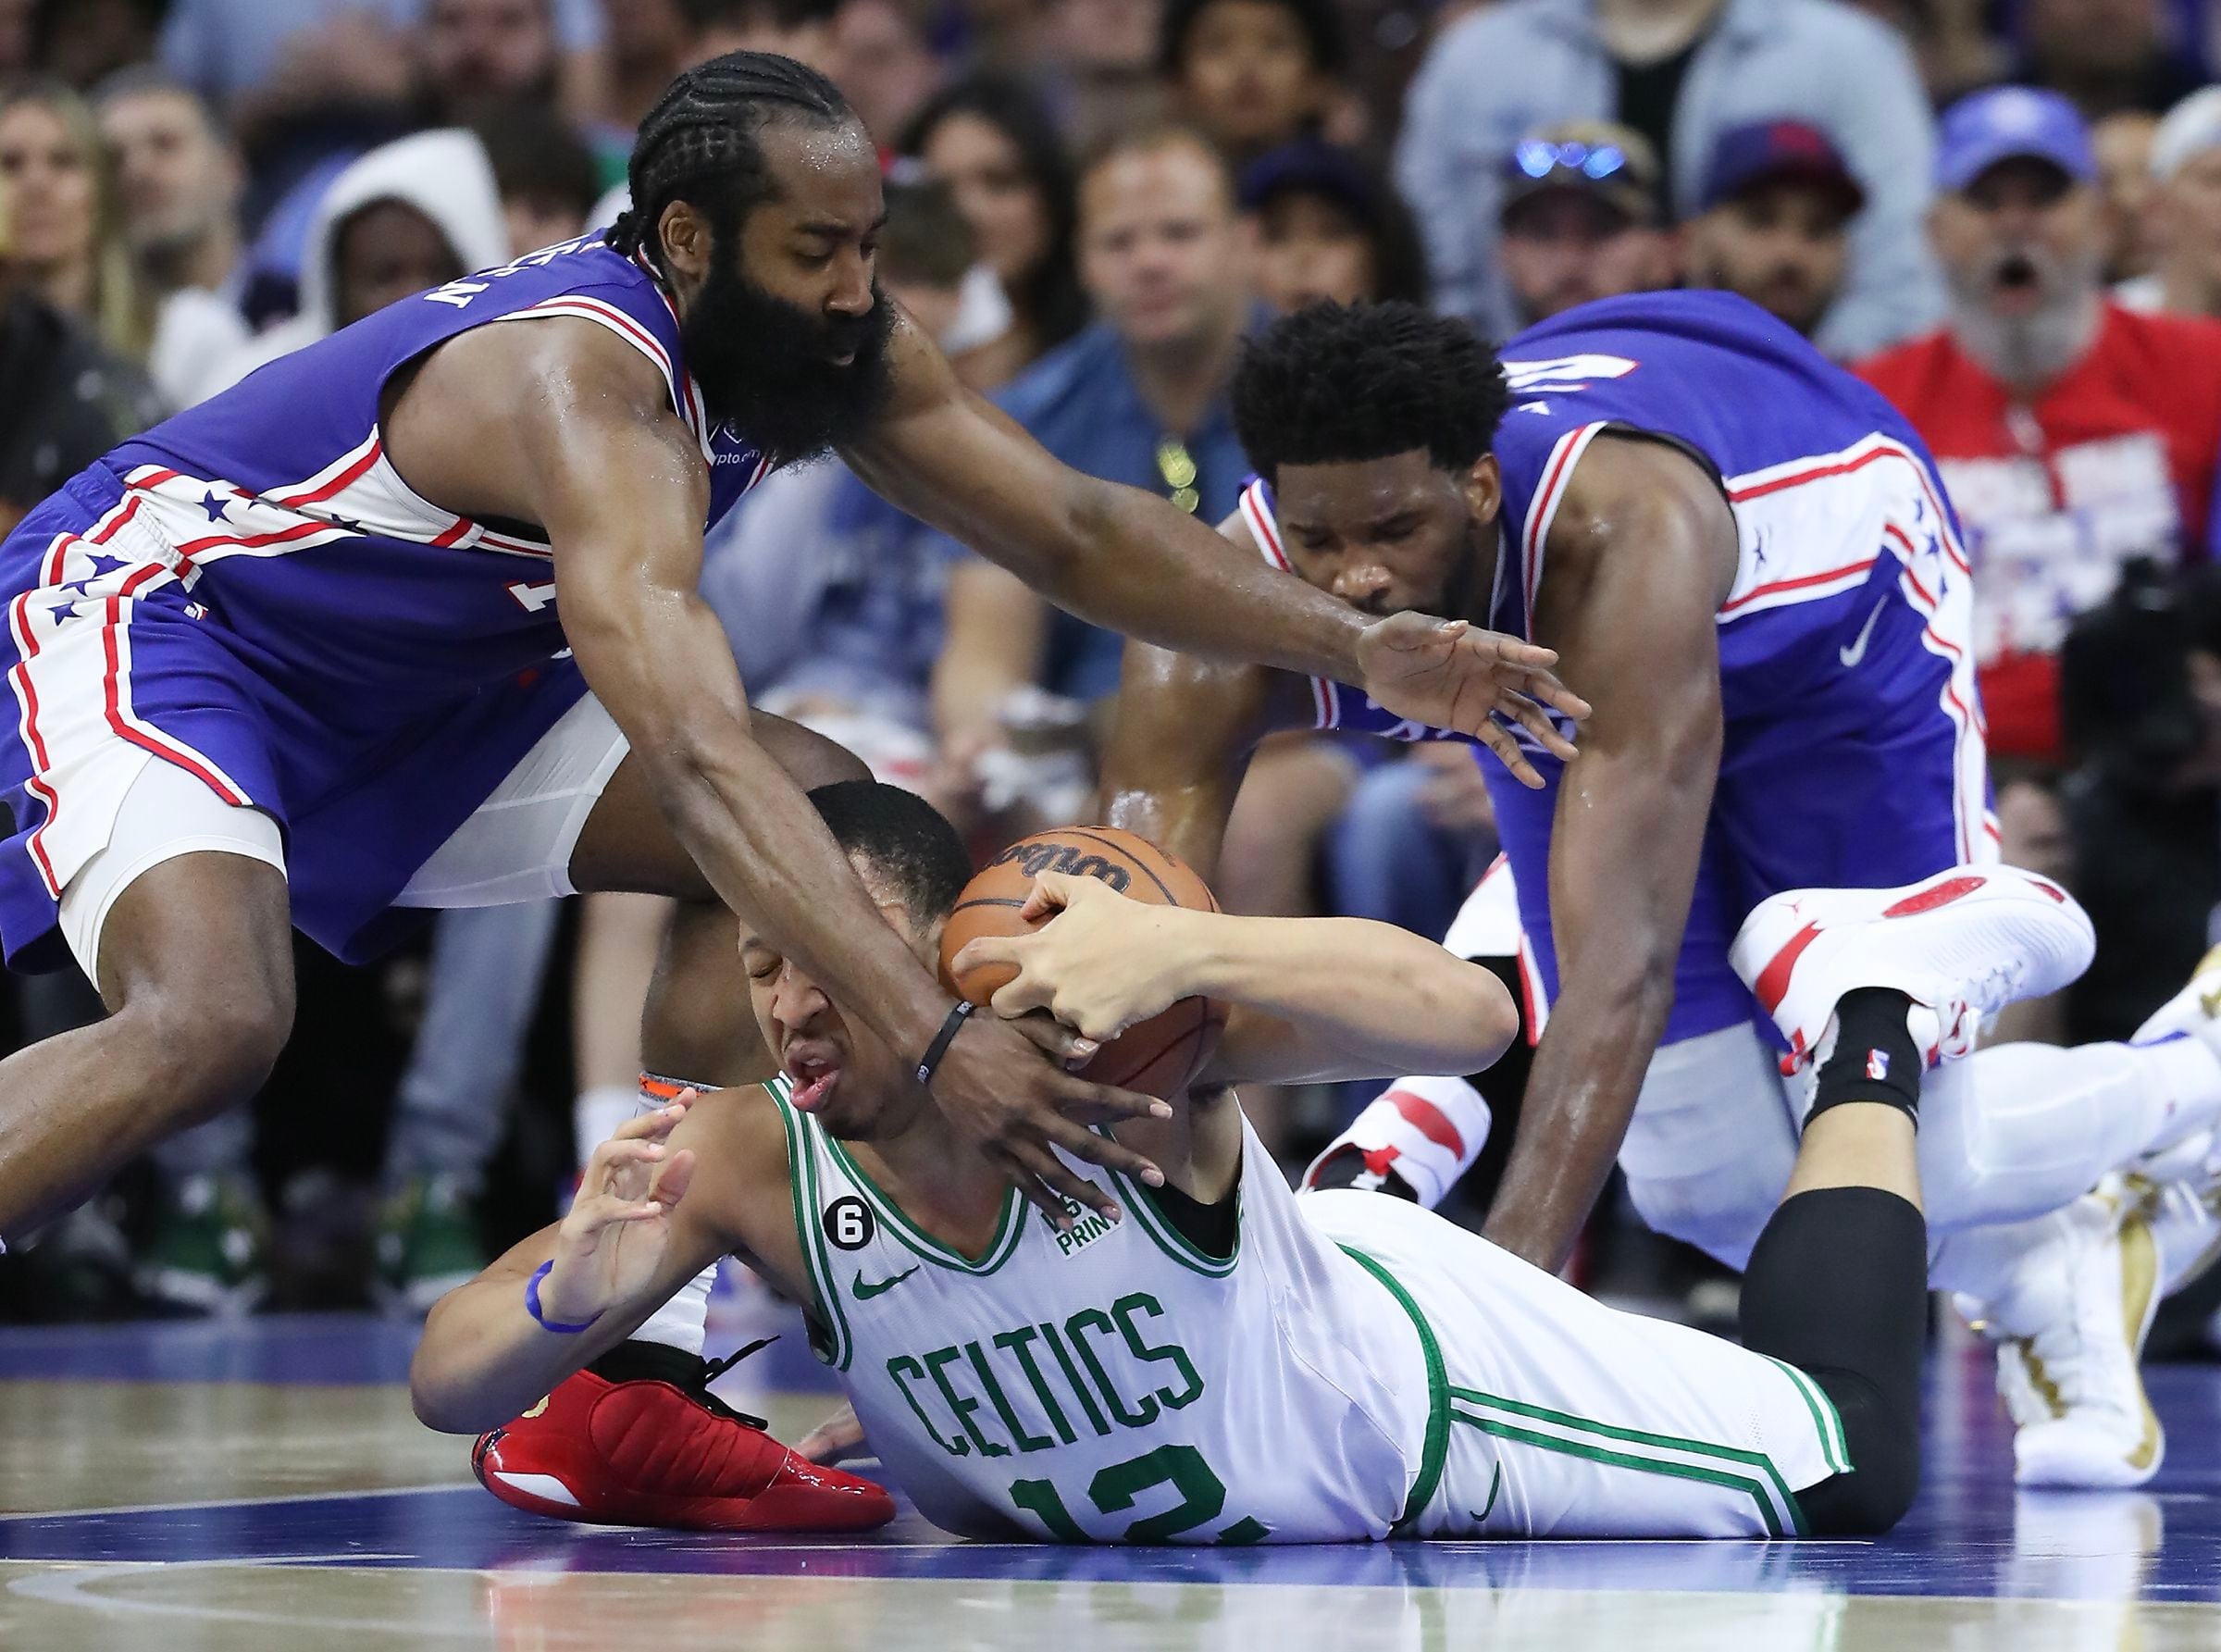 Philly sports fans united against Boston during rare schedule